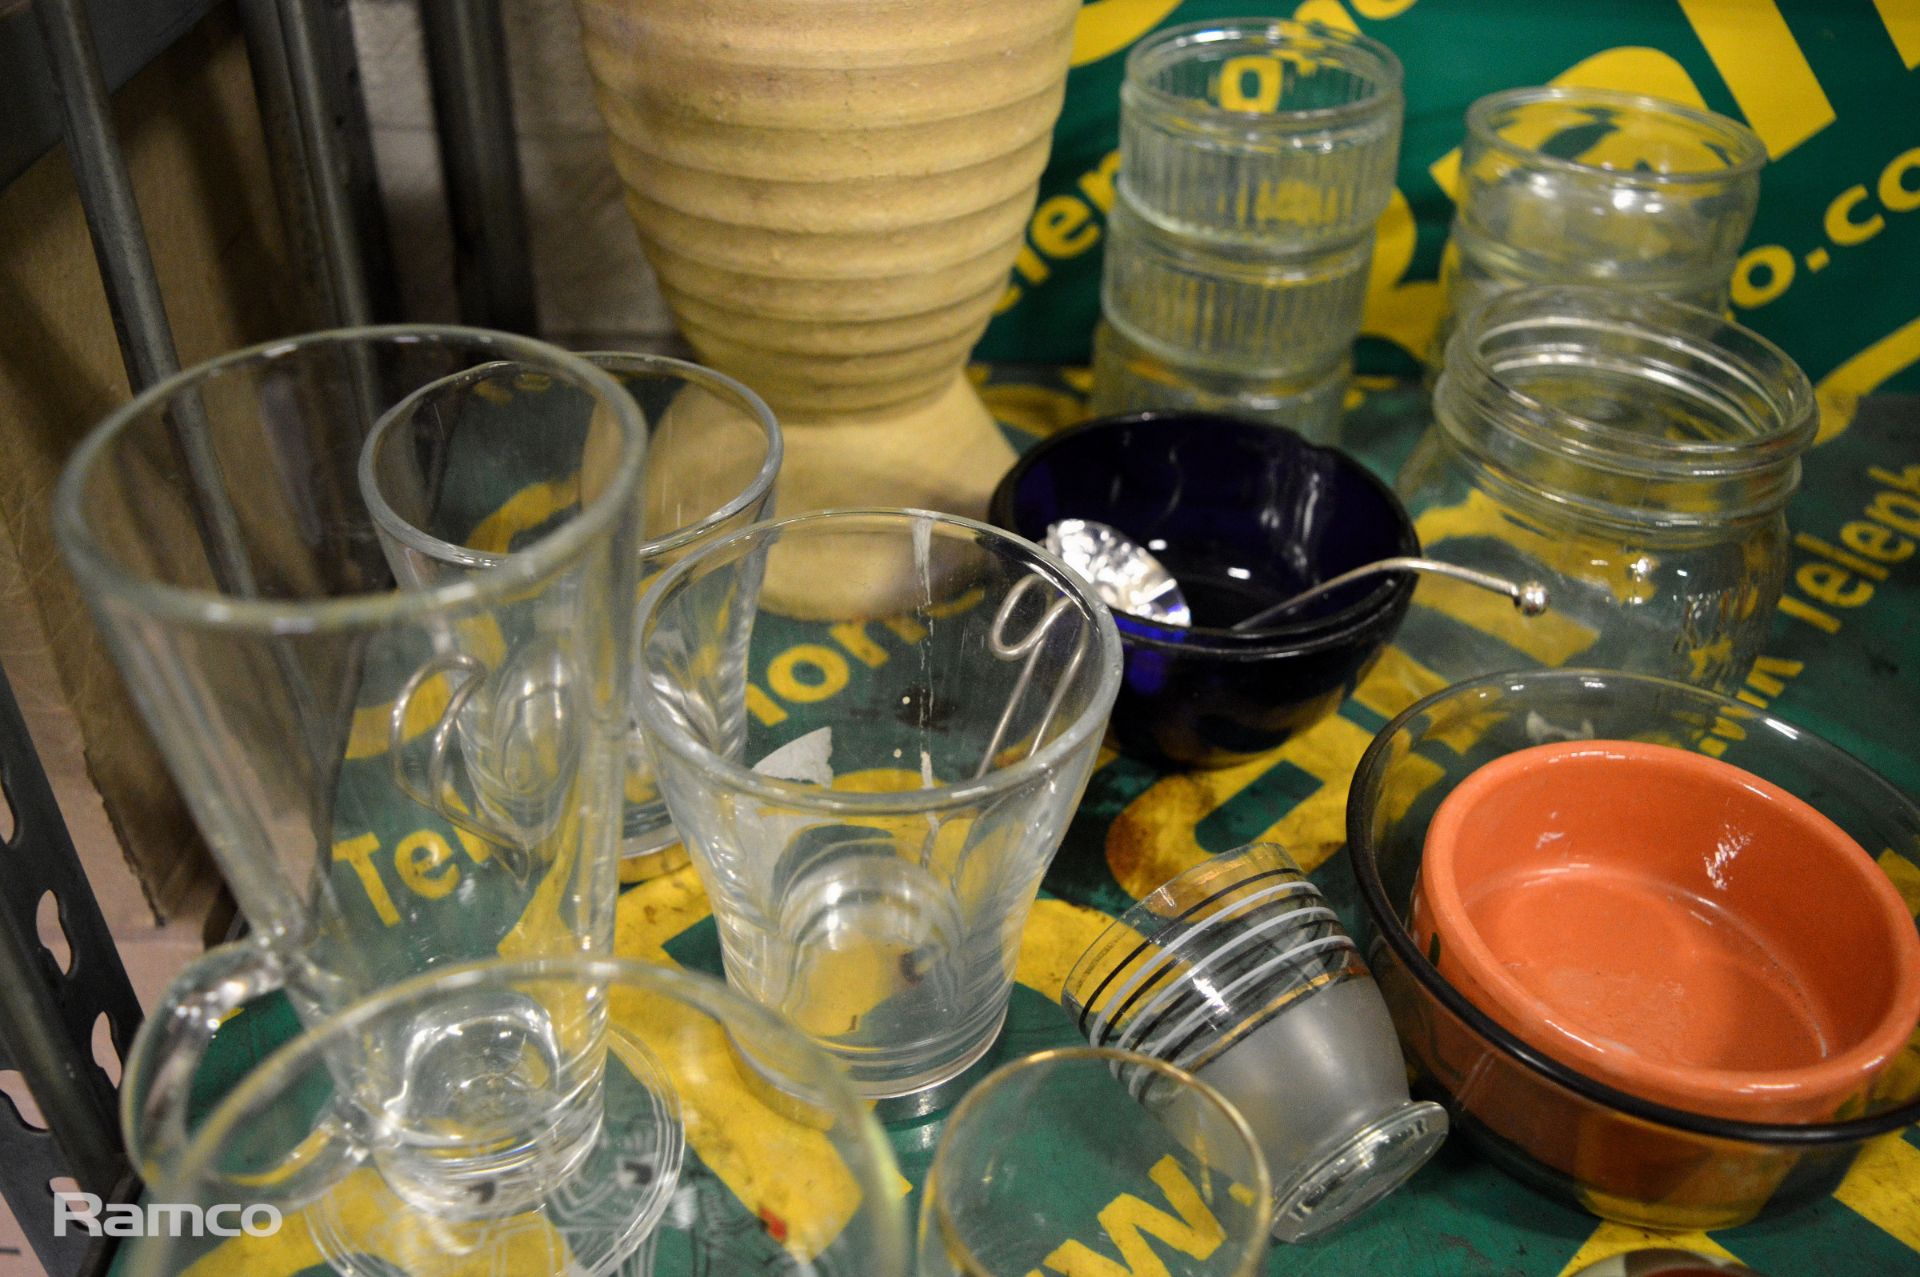 Glasses, ornaments, used drinking cups, empty tool boxes - Image 3 of 5